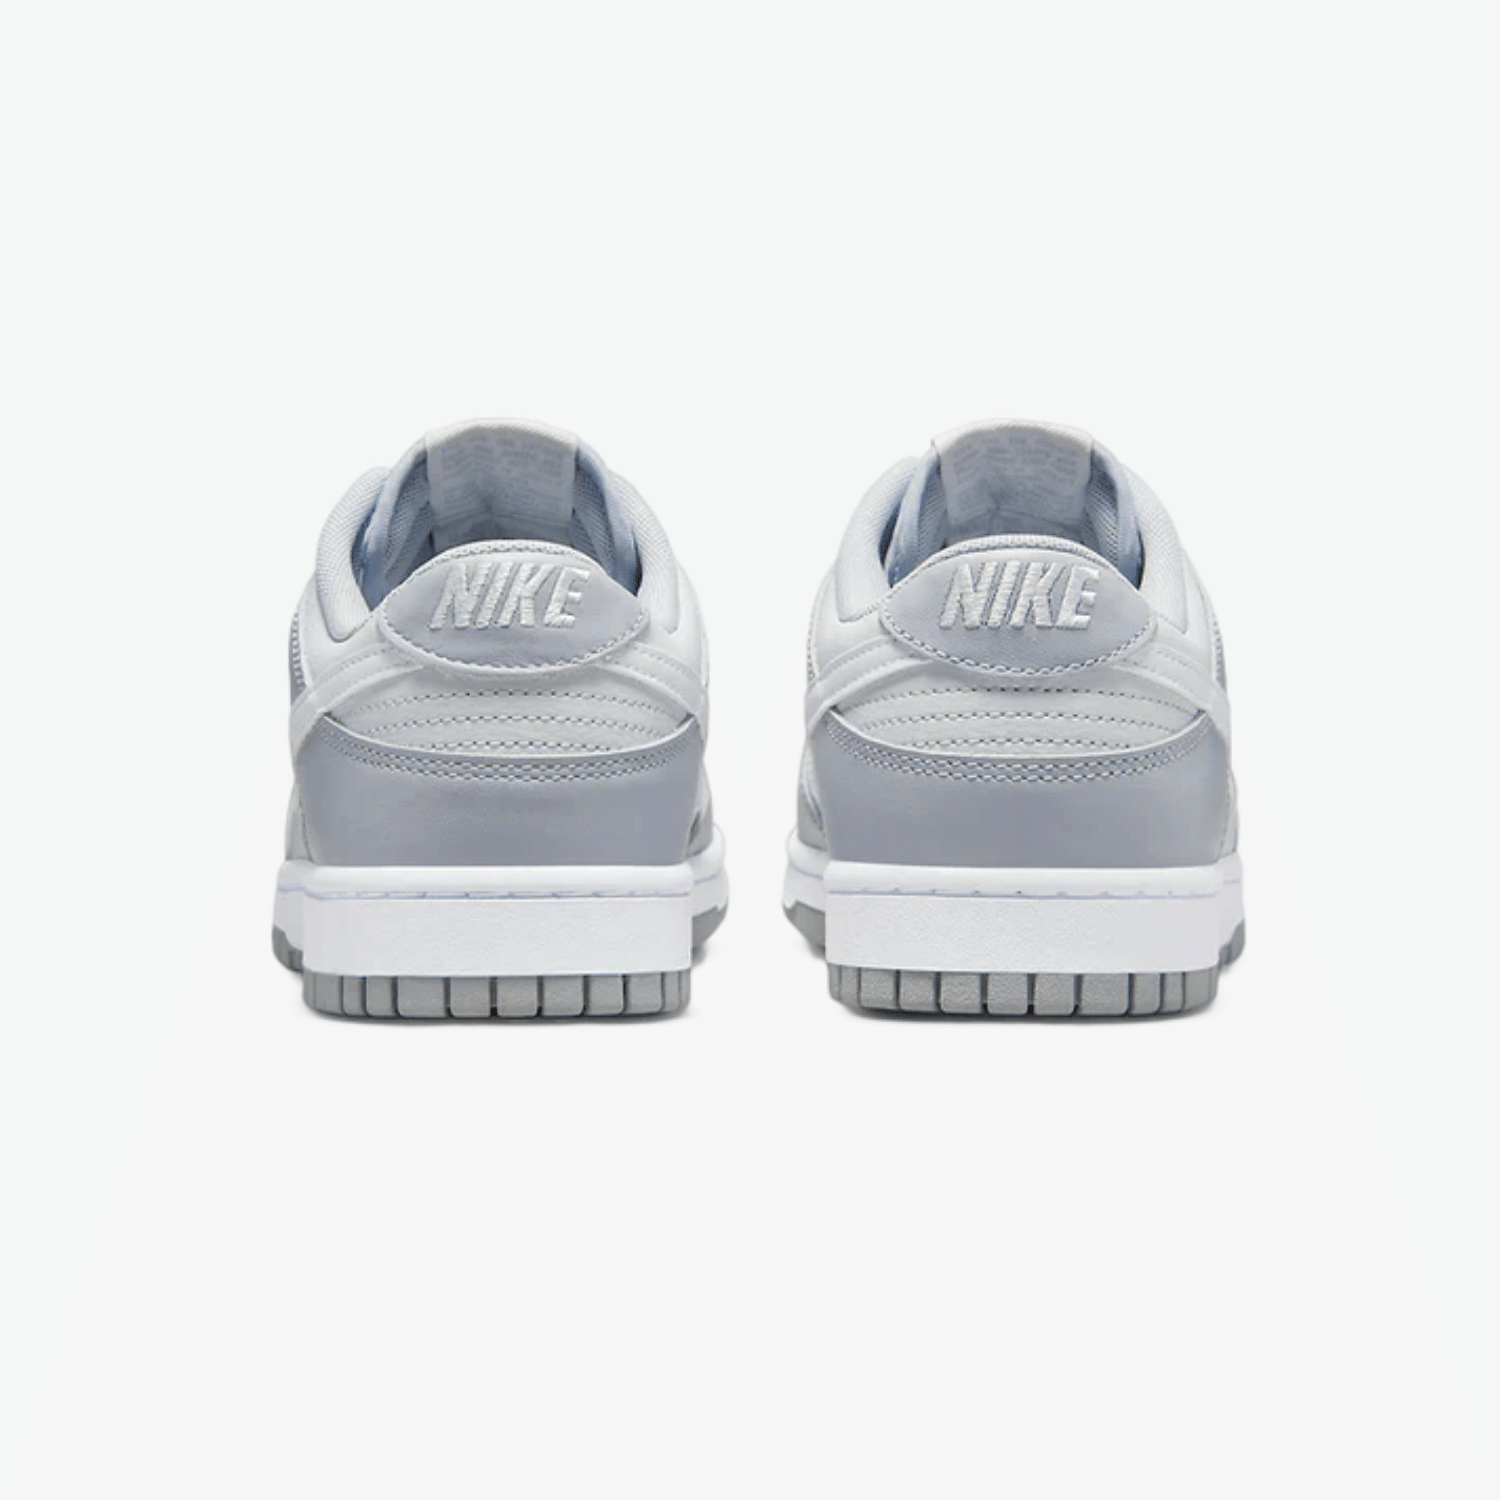     nike-dunk-low-two-tone-grey-DH9765-001-unfazed-3